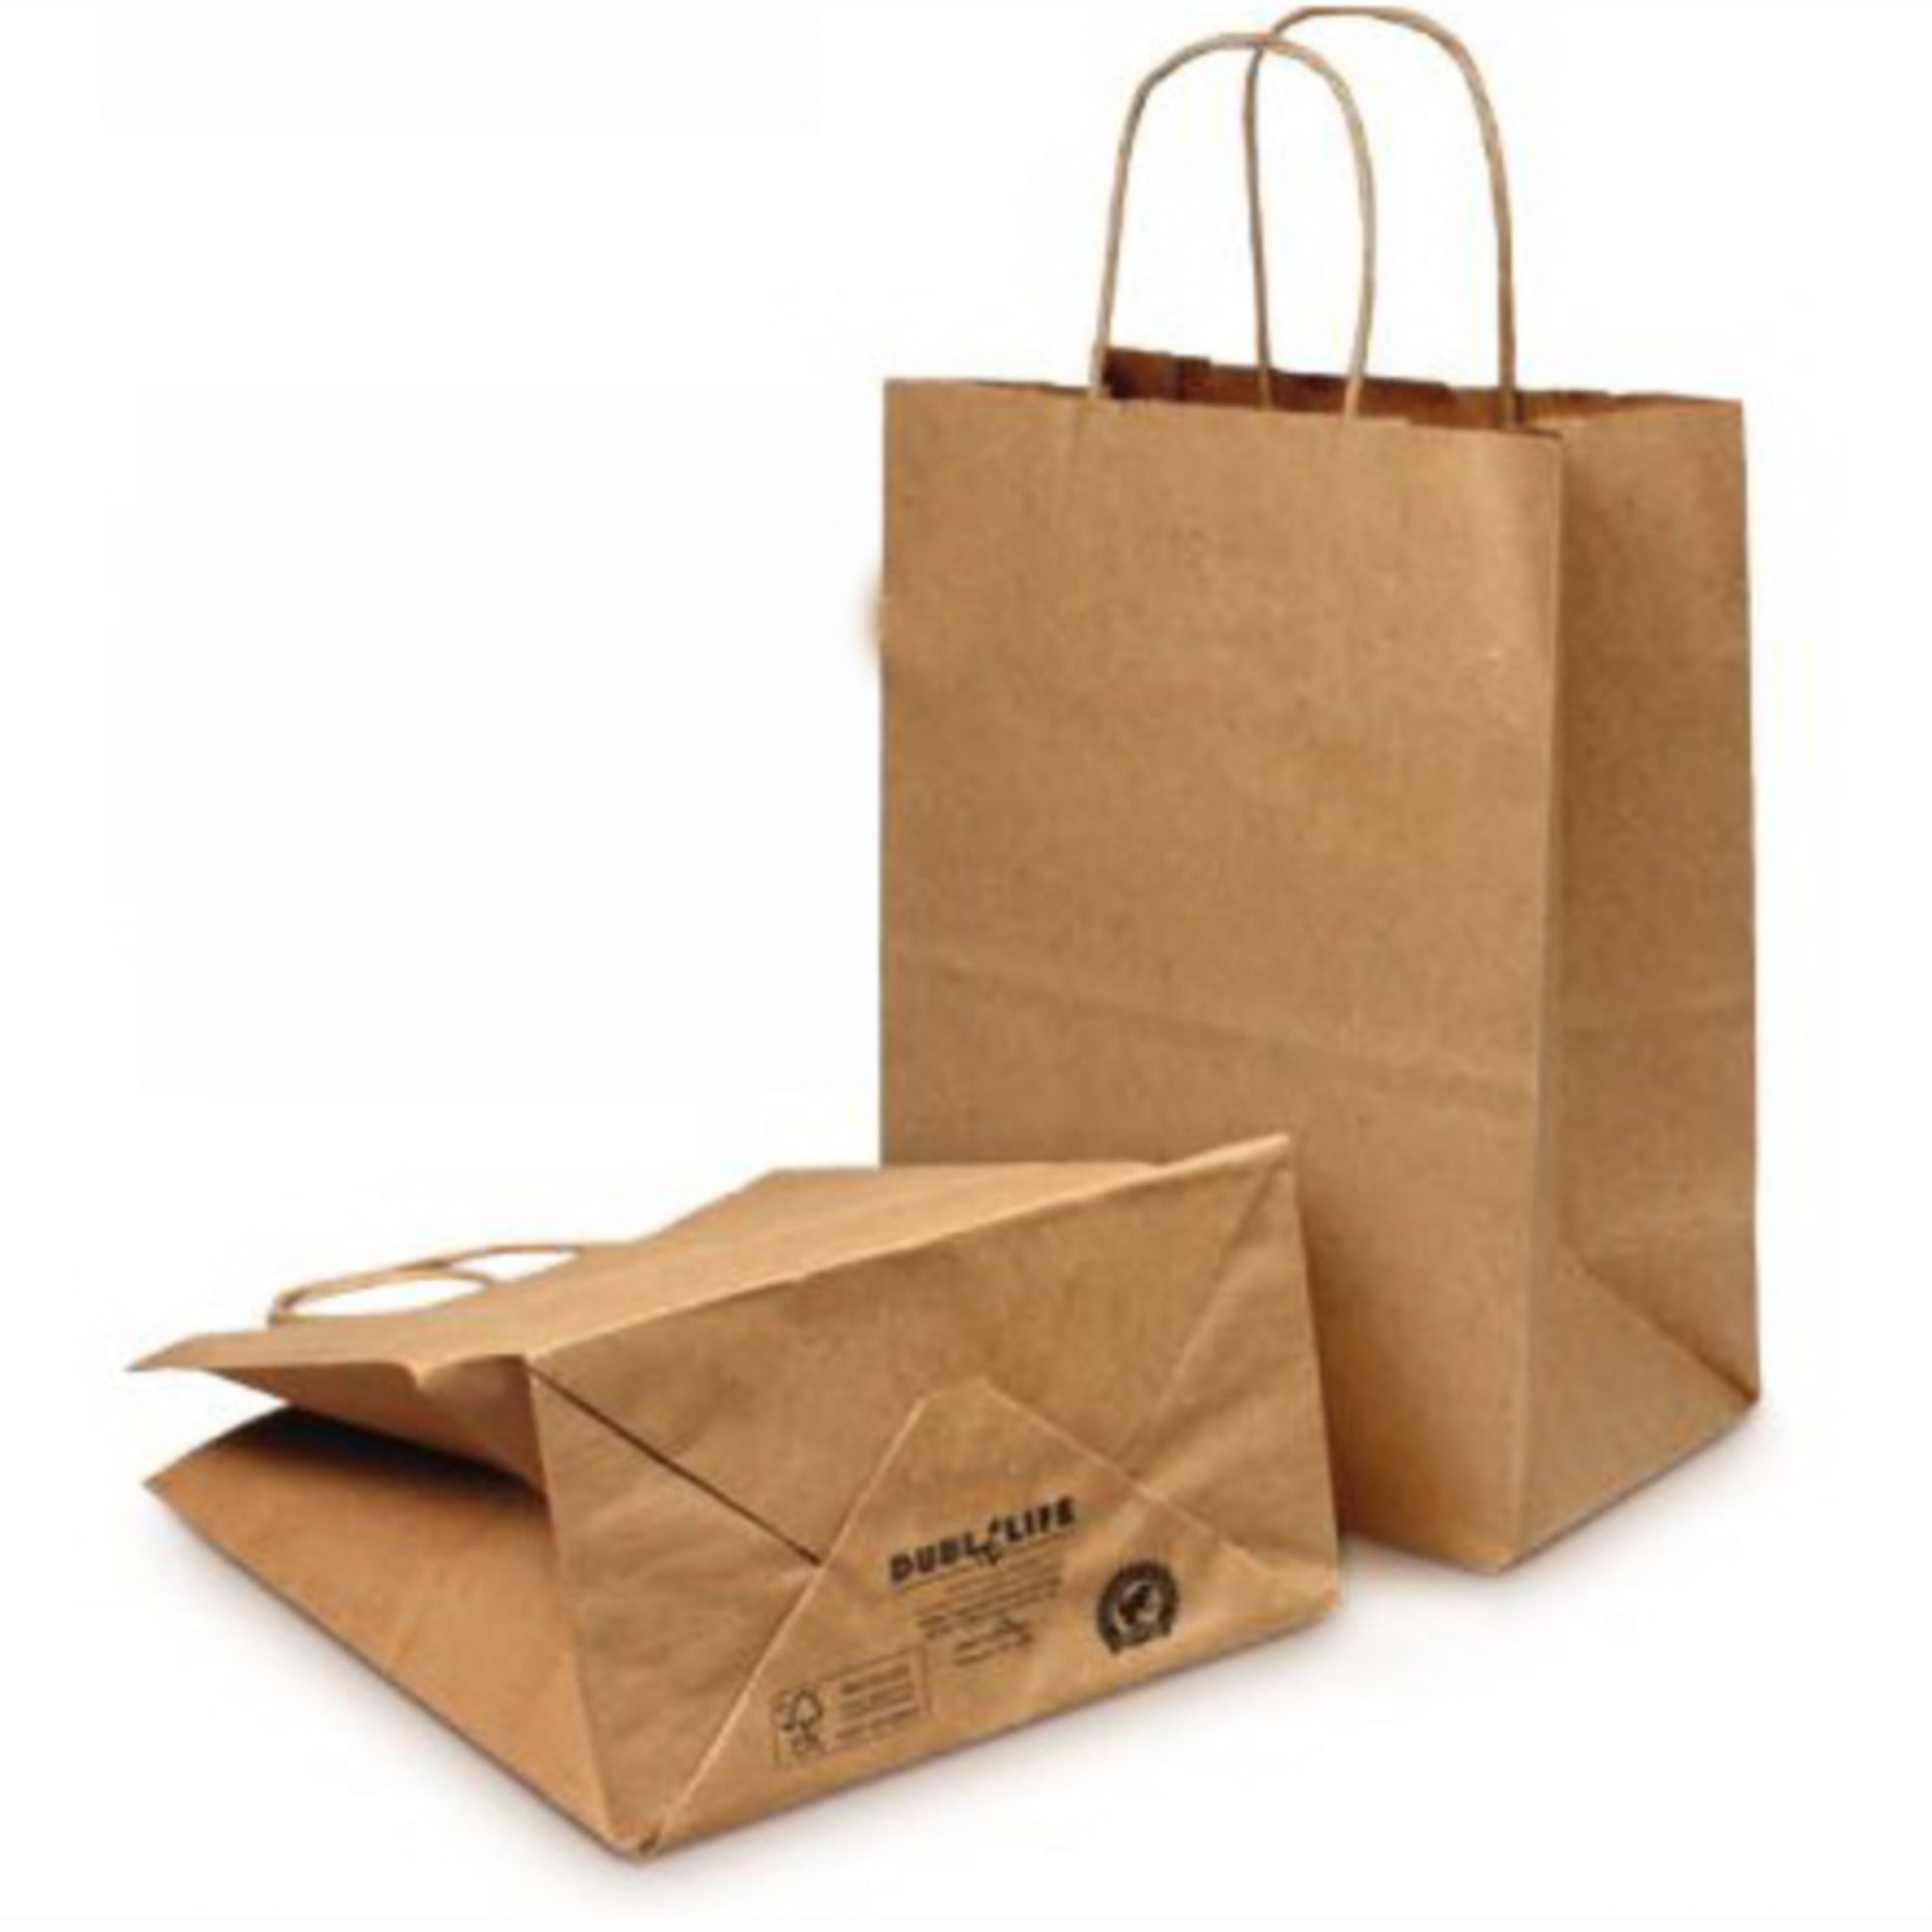 These popular 8in x 4.5in x 10.25in Dubl Life® 60#  Kraft Tempo Paper Bags with gusseted flat bottom and paper twist handles are BPI® and FSC® certified. Sold 250 per bundle. Free shipping available. 